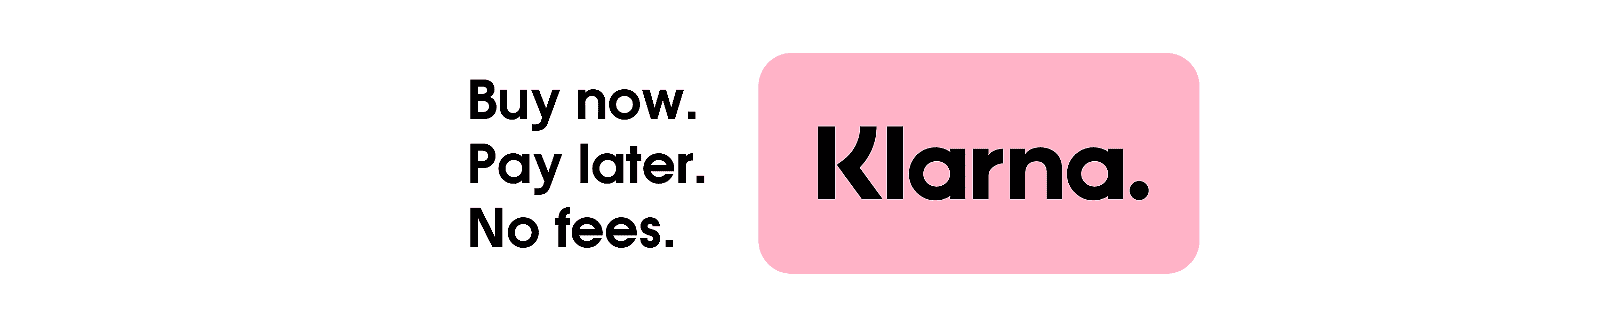 Buy Now. Pay Later. No Fees. Klarna.